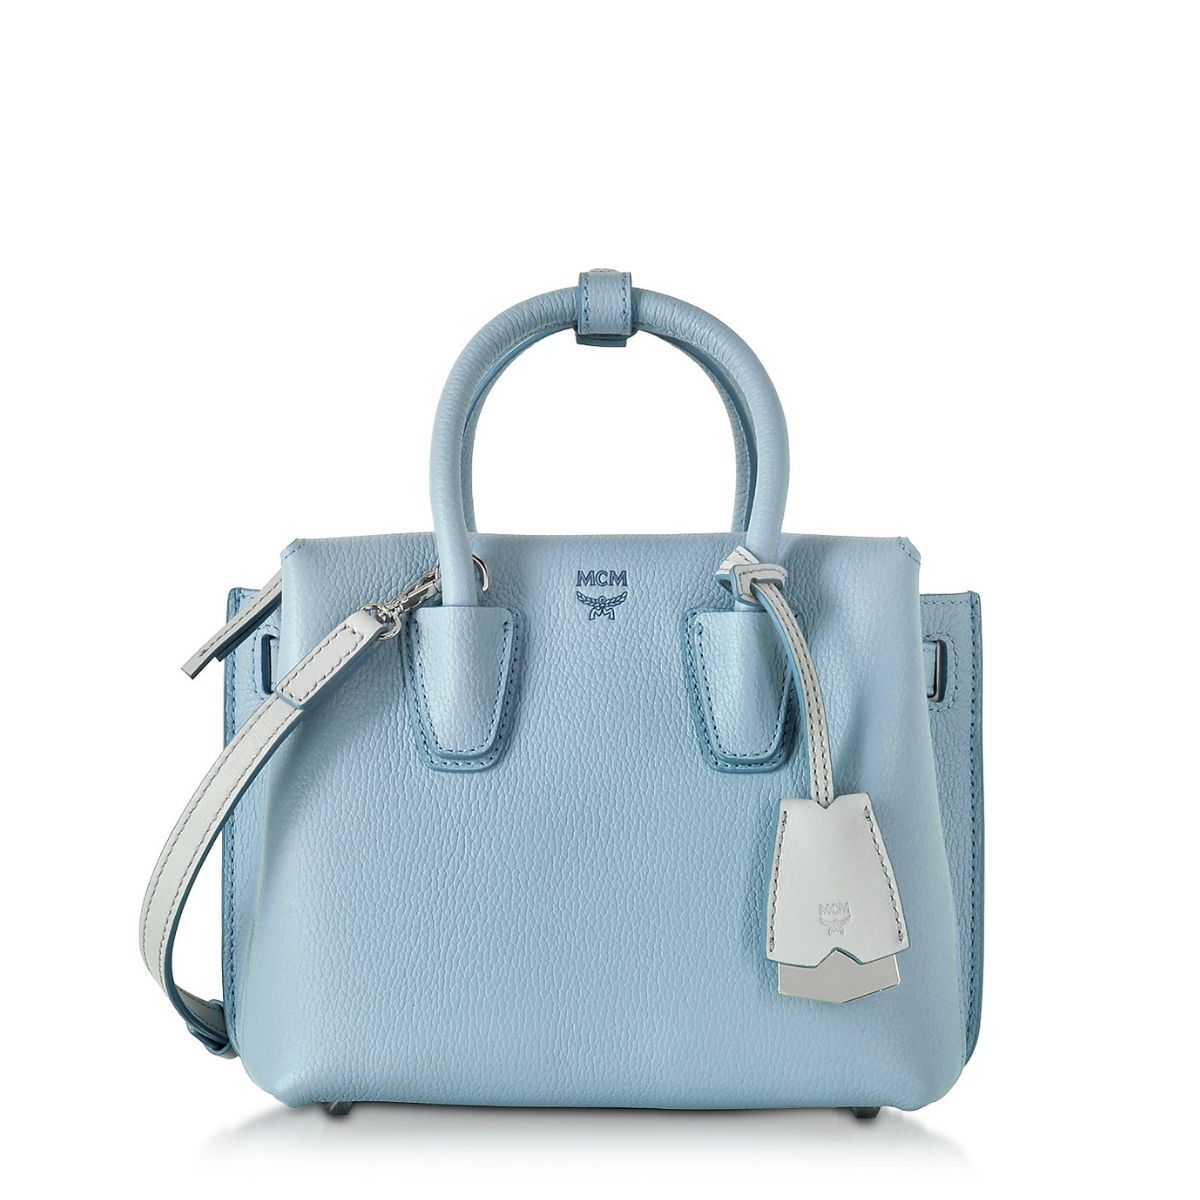 MCM SKY BLUE USED AUTHENTIC EURO RELEASE MCM BAG